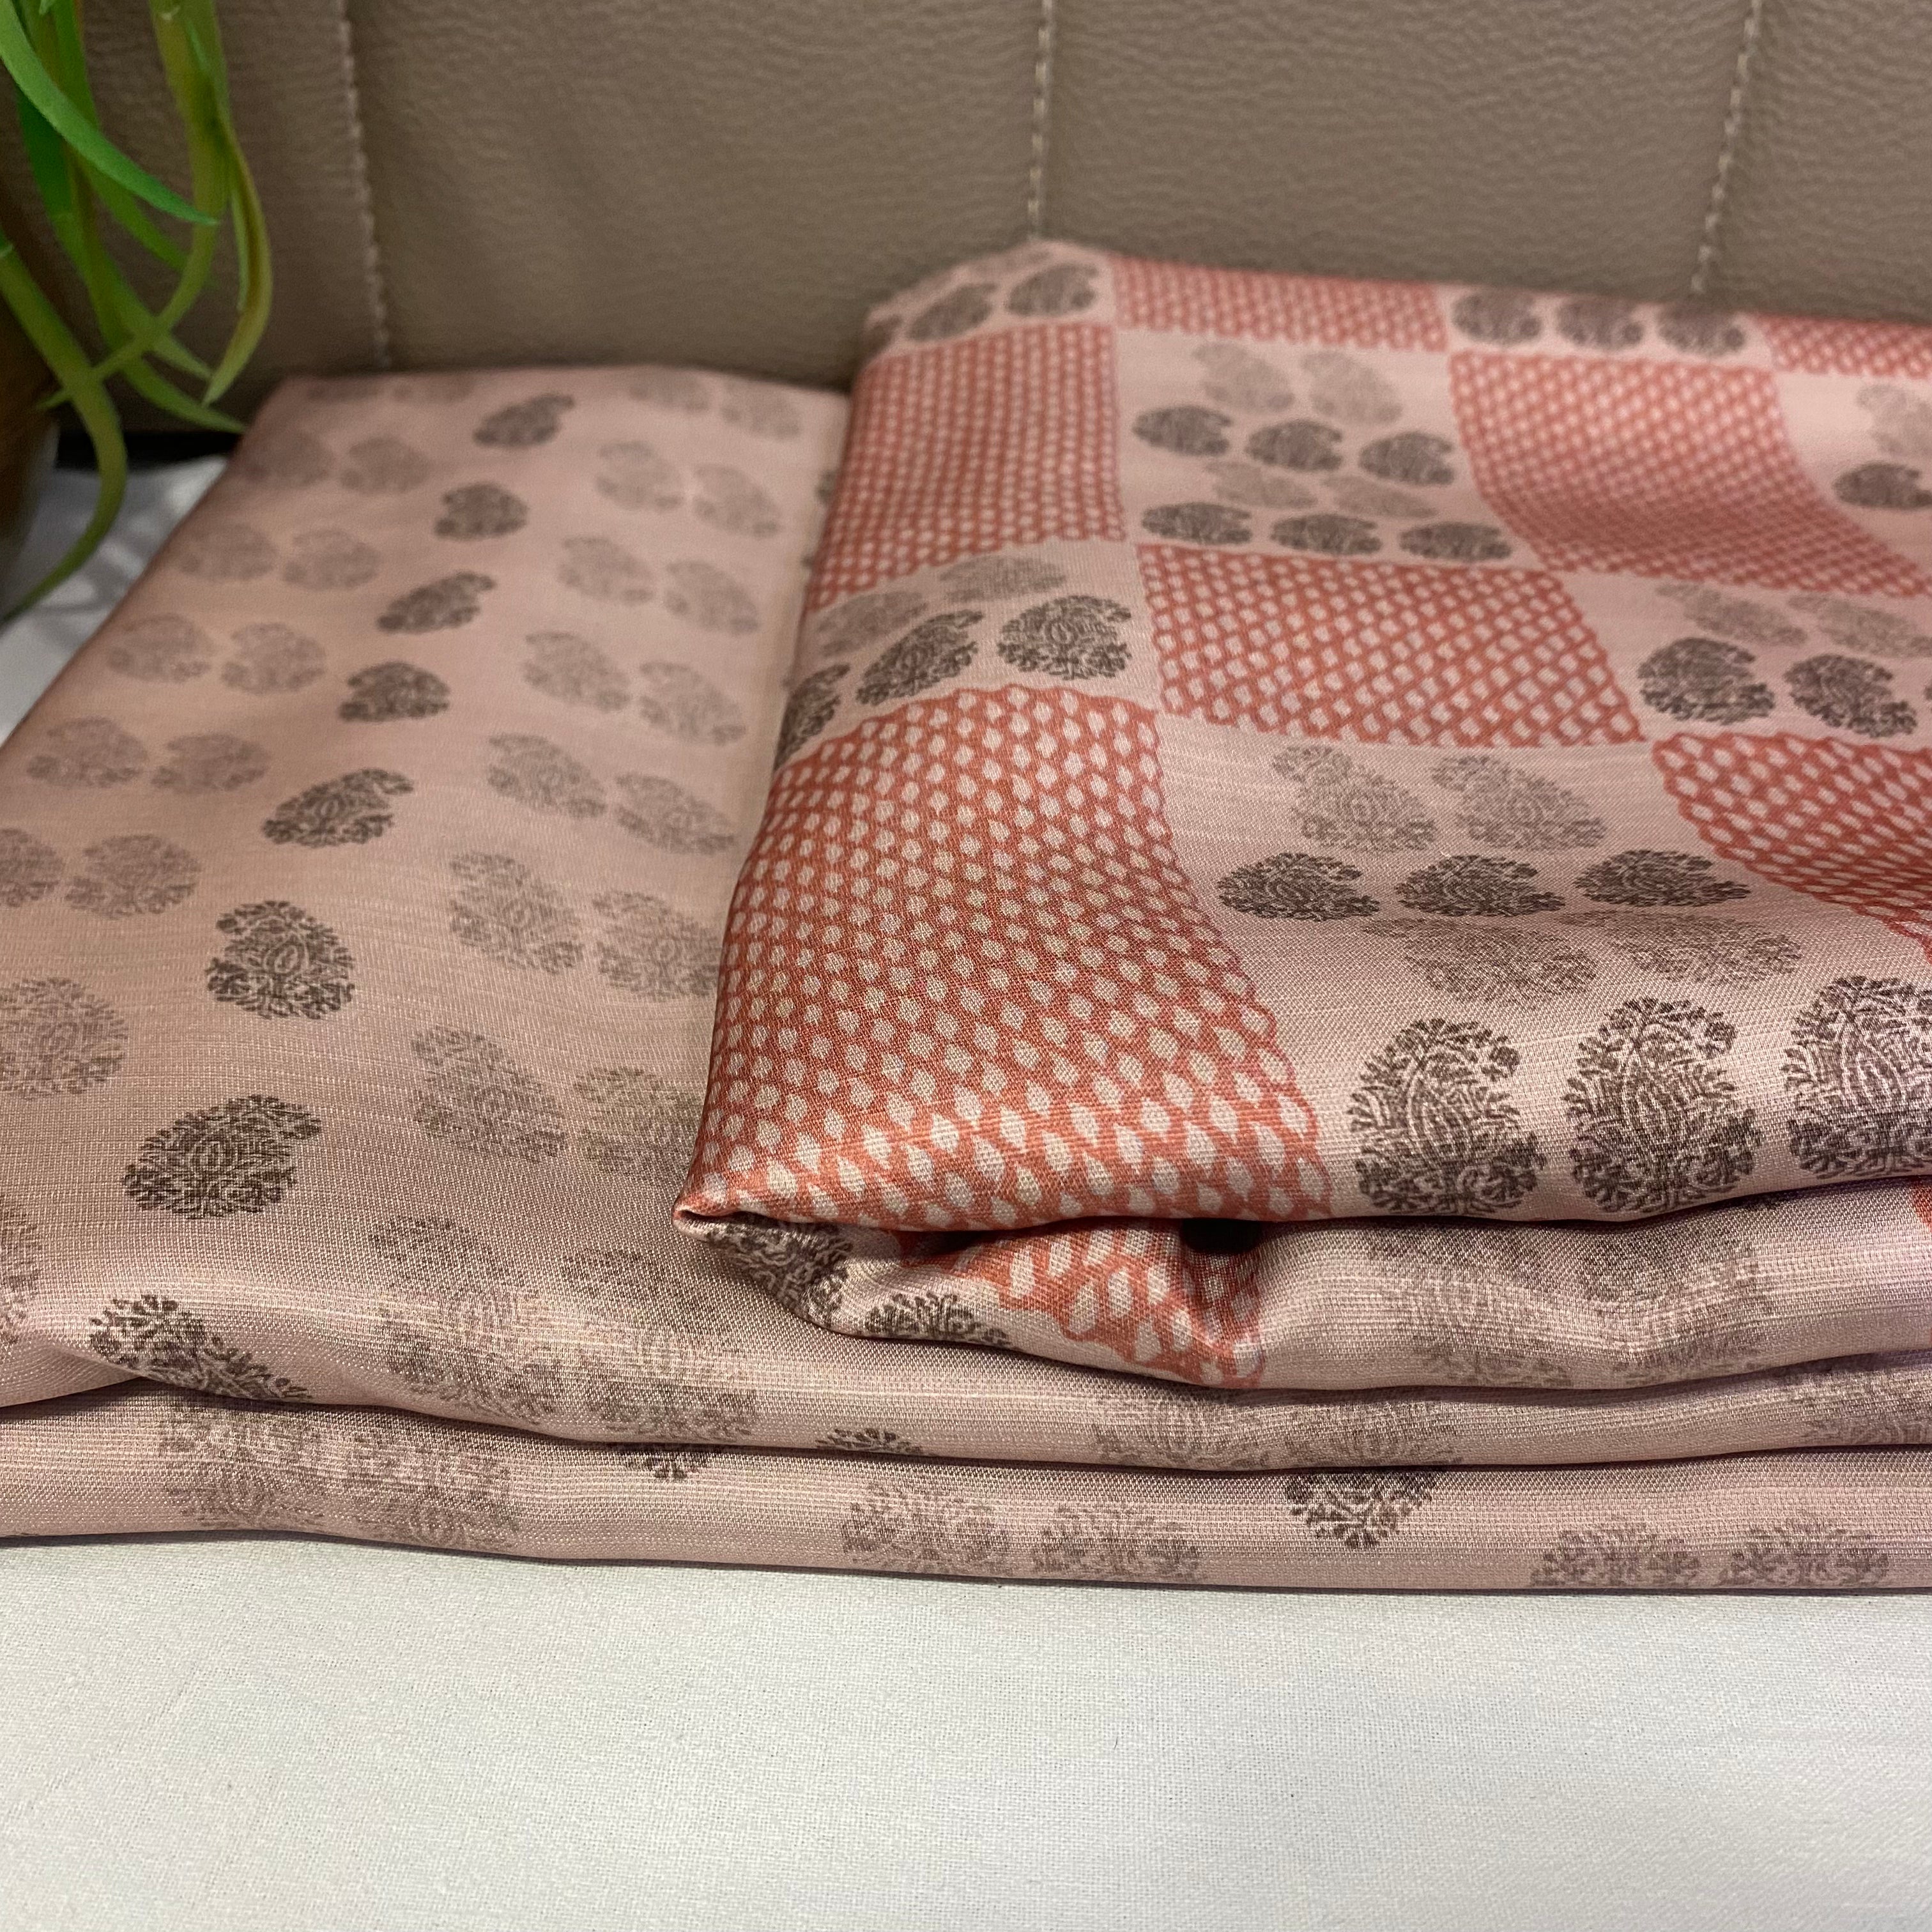 Linen Satin Mix-Match Set in Dusty Pink Abstract print, per meter price